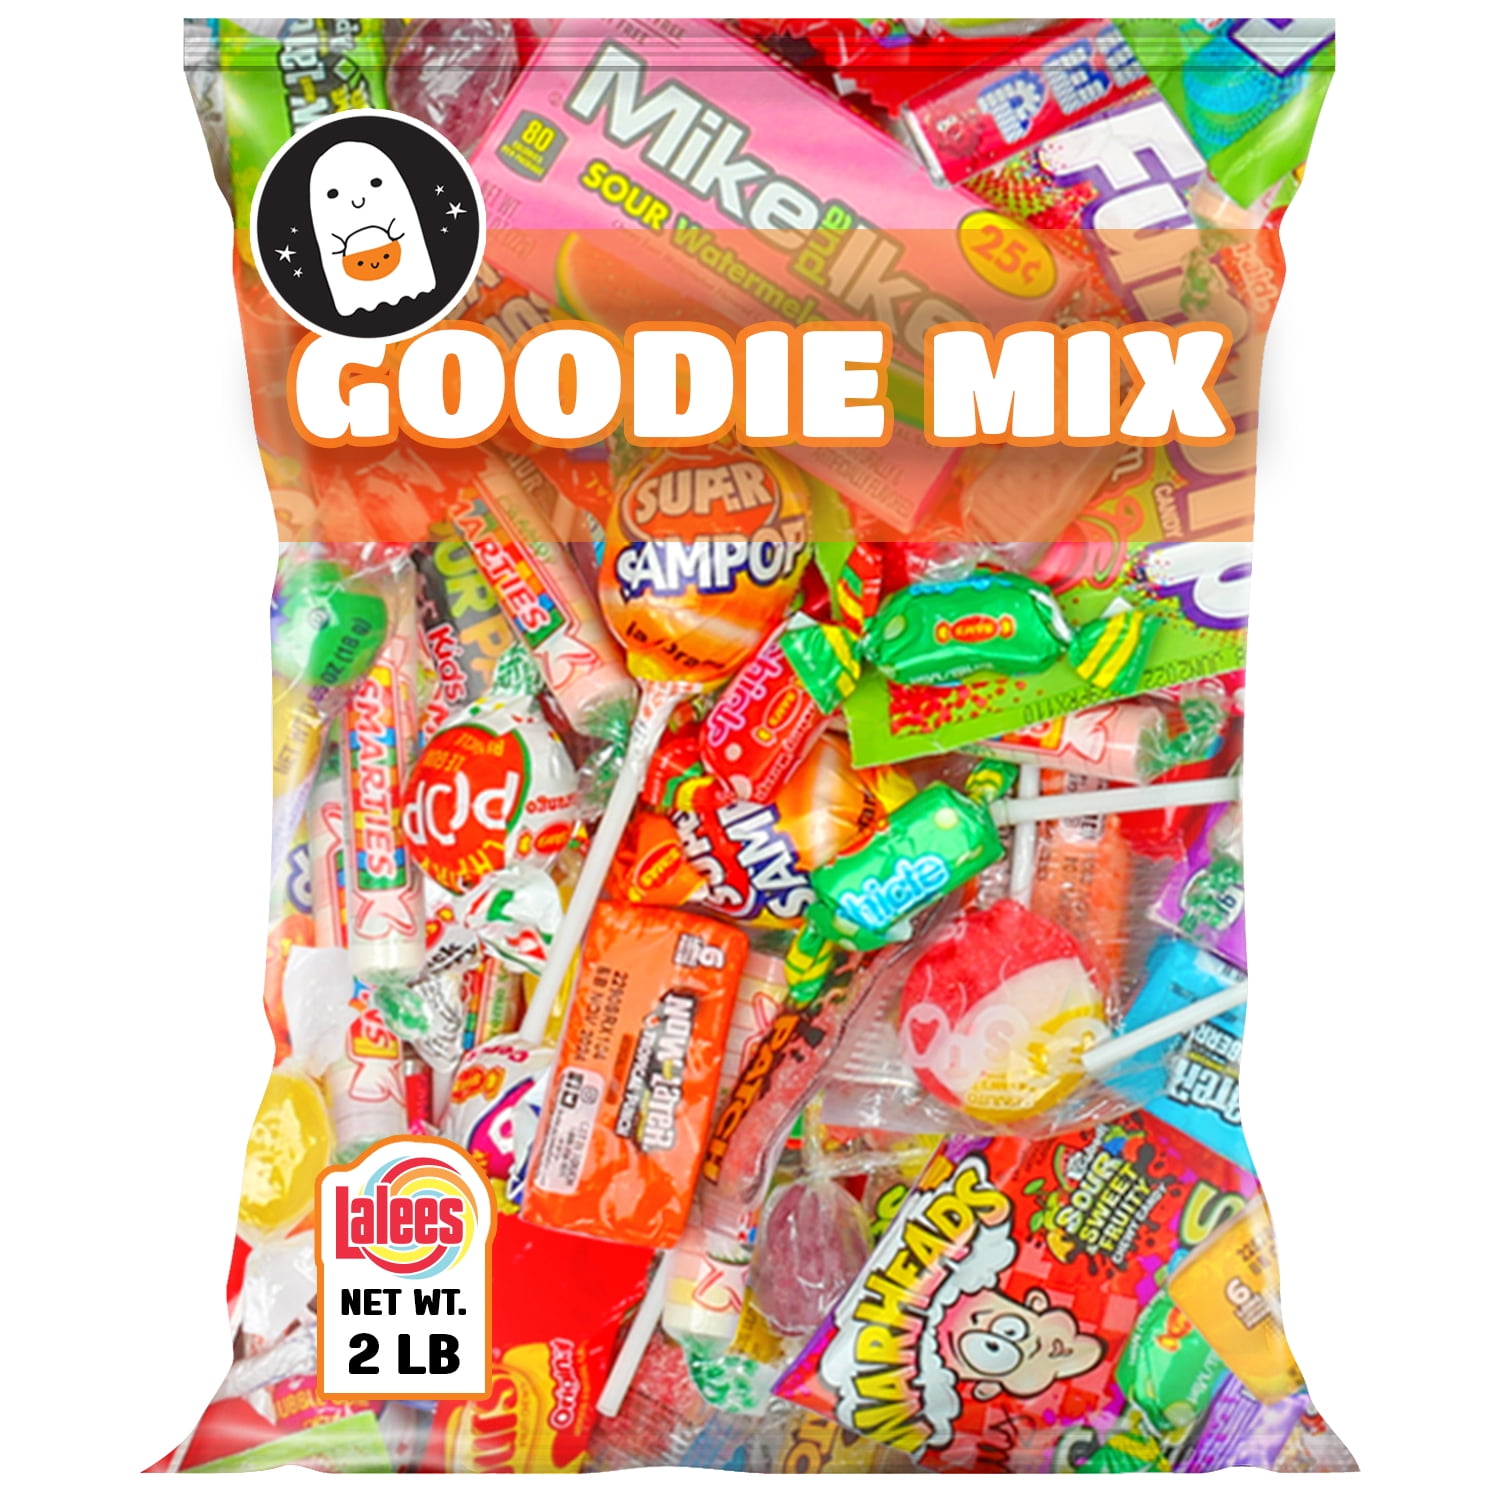 Assorted Candy Party Mix, 2 lb Bulk Bag - Candy Bulk - Fun Size Skittles, Top Box Pop Taffy Pops, Fun Dip, and Much More!